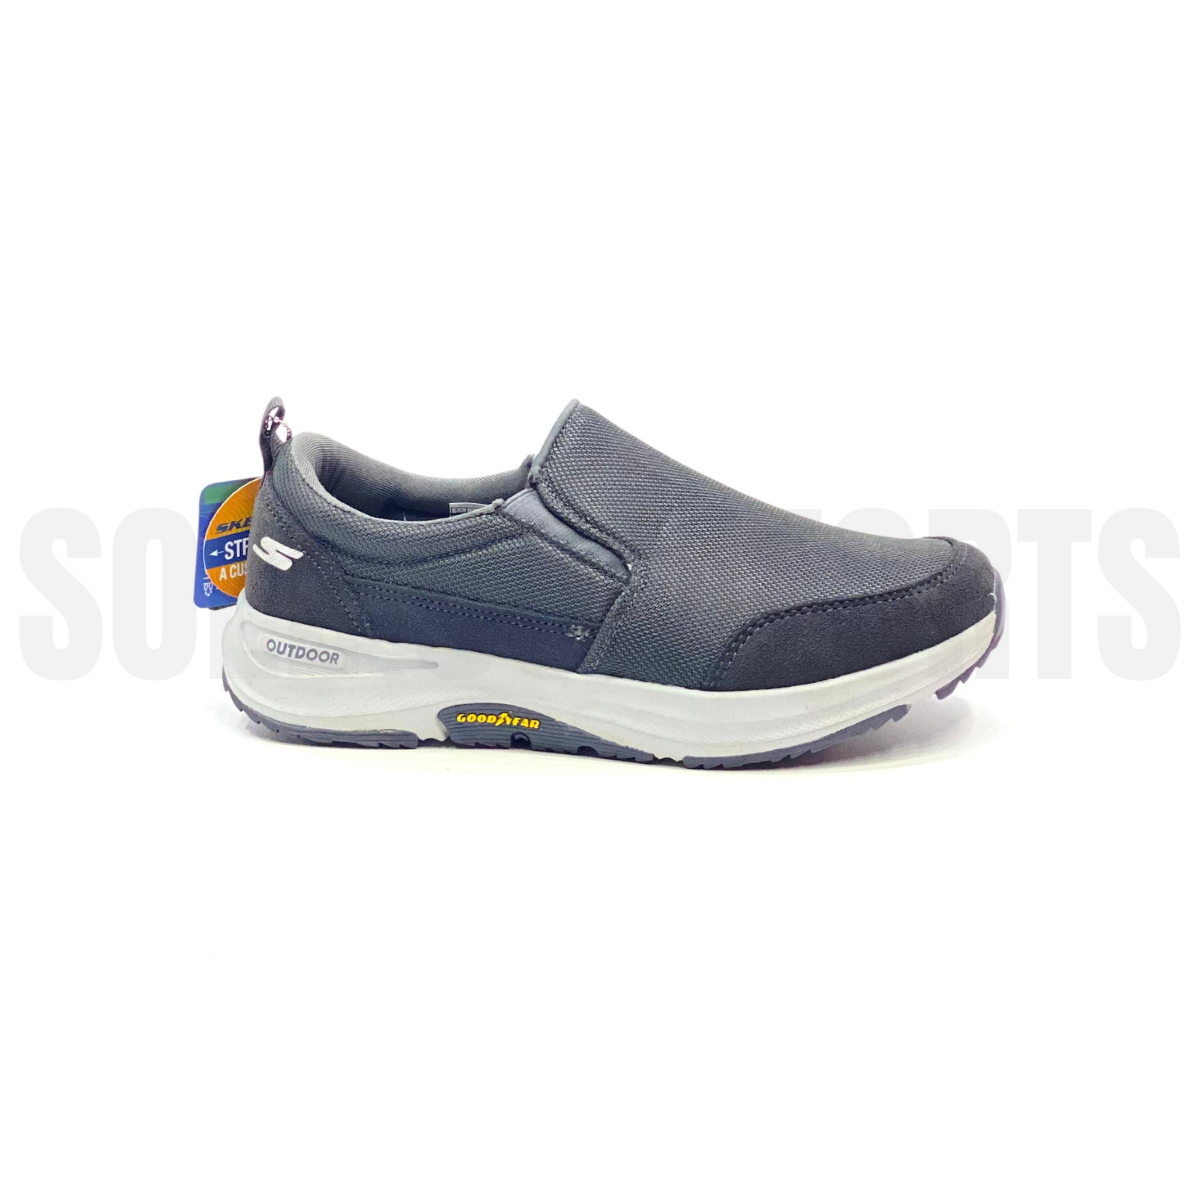 SKECHERS Arch Fit GOOD YEAR (GRAY)